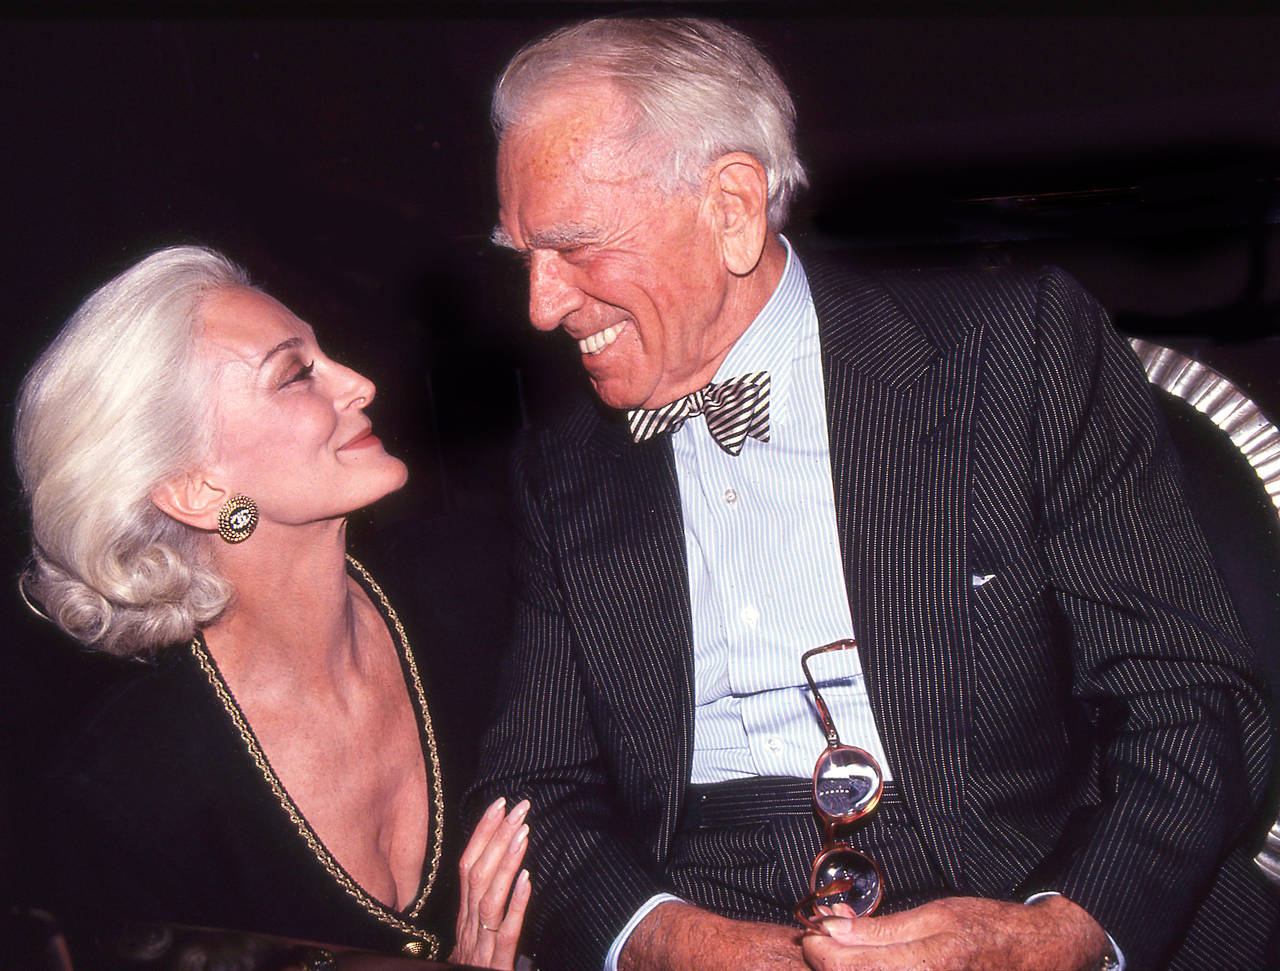 Rose Hartman Color Photograph - Carmen and Horst, book party for Horst at Bendel's, early 80's